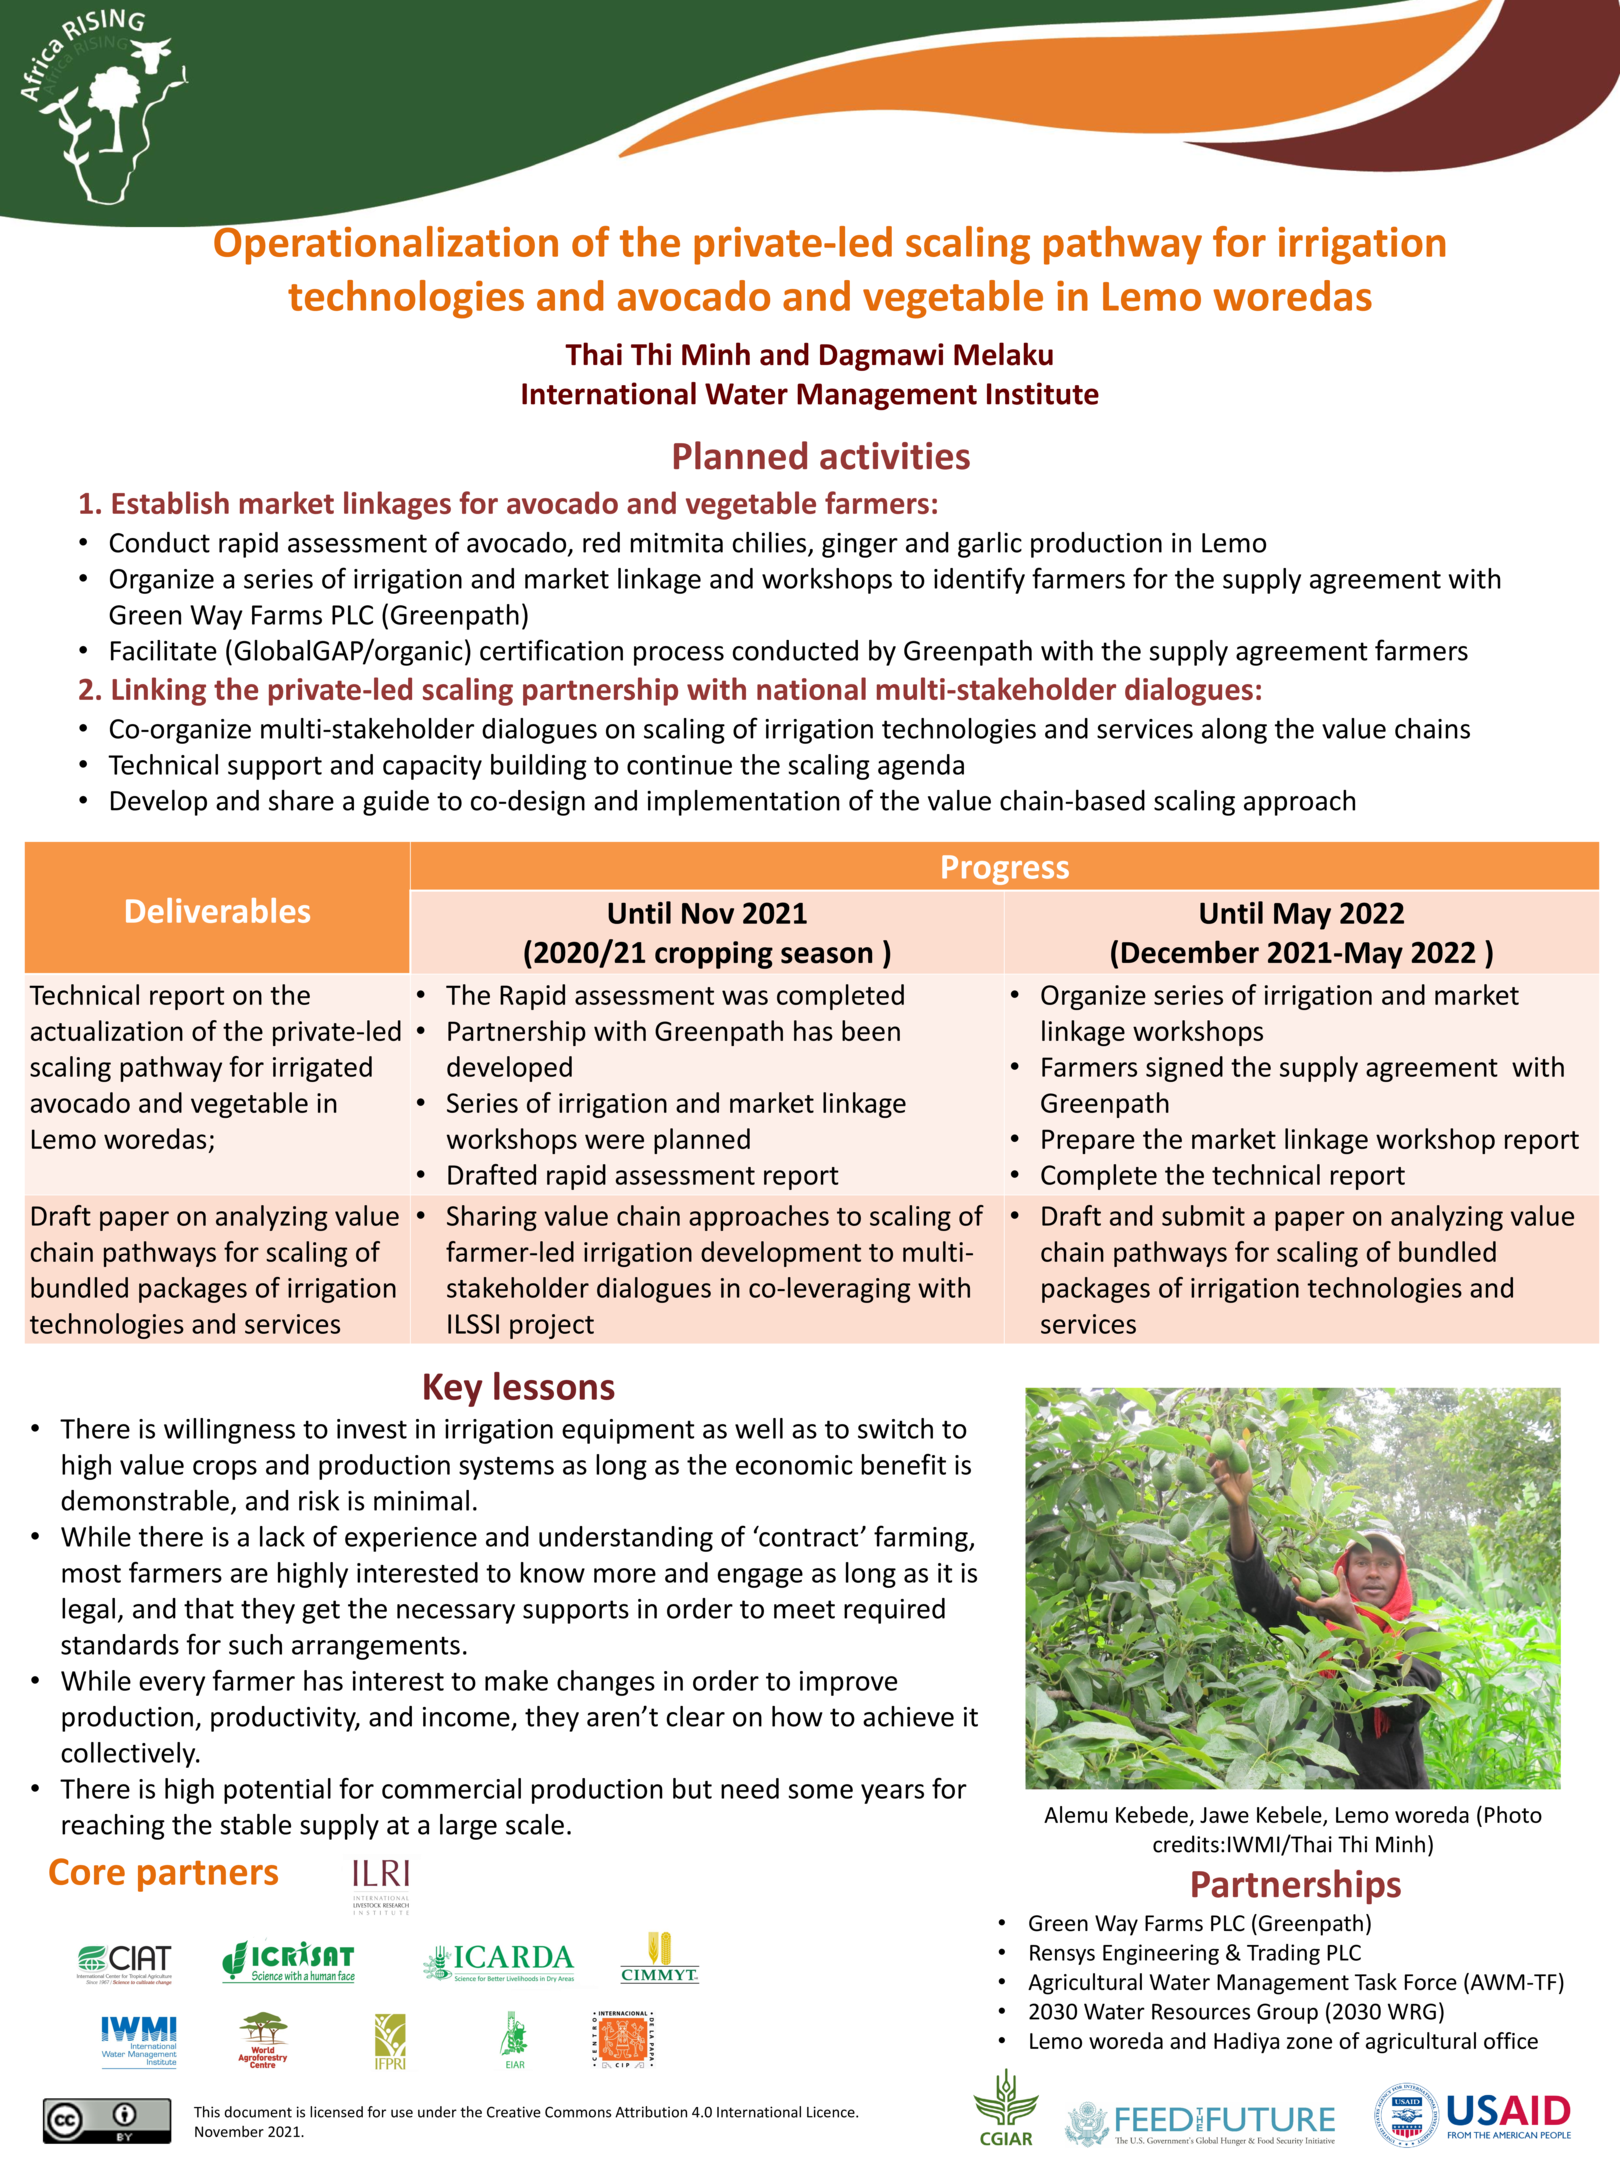 6.Operationalization of the private-led scaling pathway for irrigation technologies and avocado and vegetable in Lemo woredas